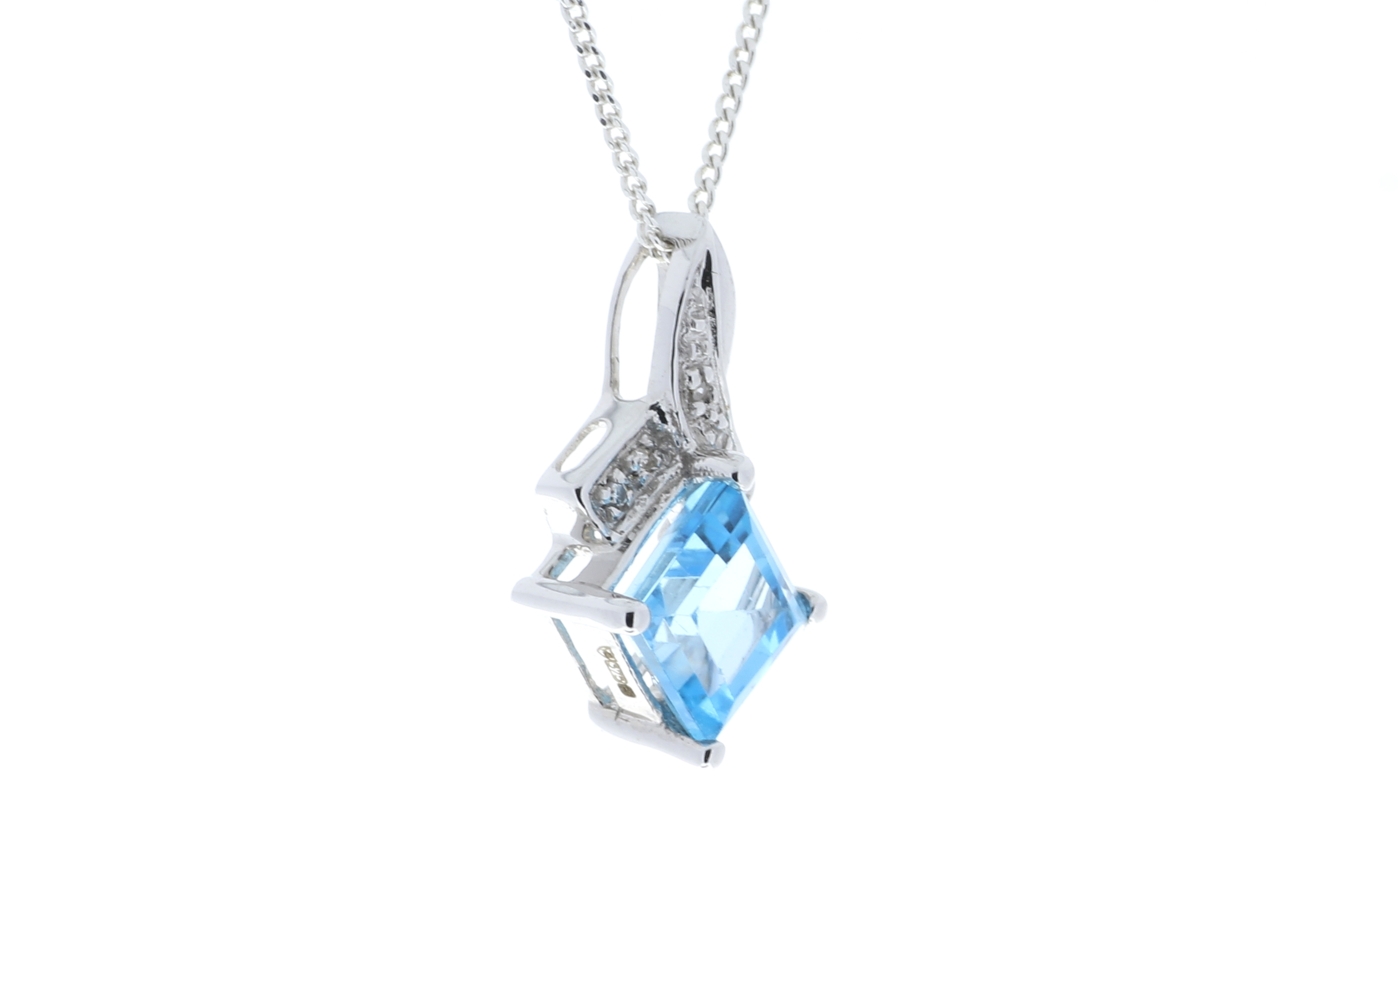 9ct White Gold Diamond And Blue Topaz Pendant 0.02 Carats - Image 2 of 5